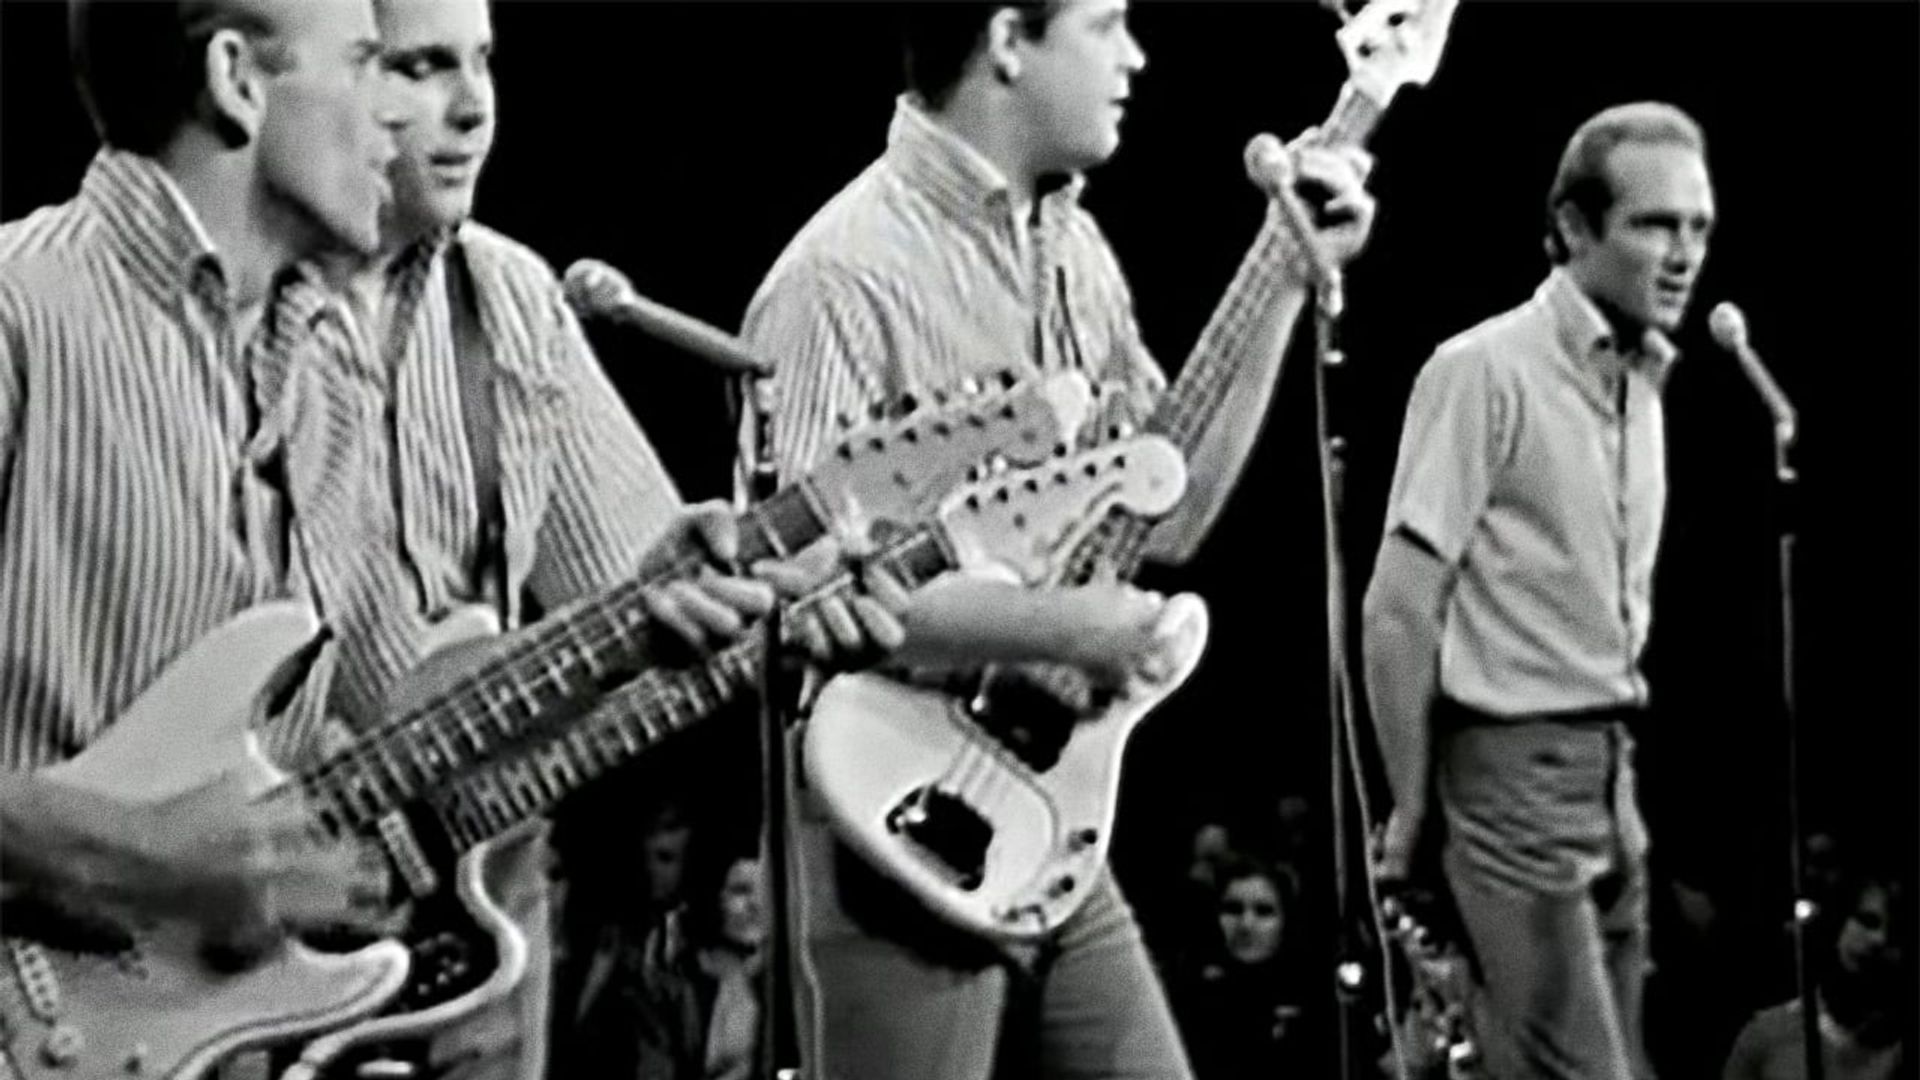 The Beach Boys: The Lost Concert background